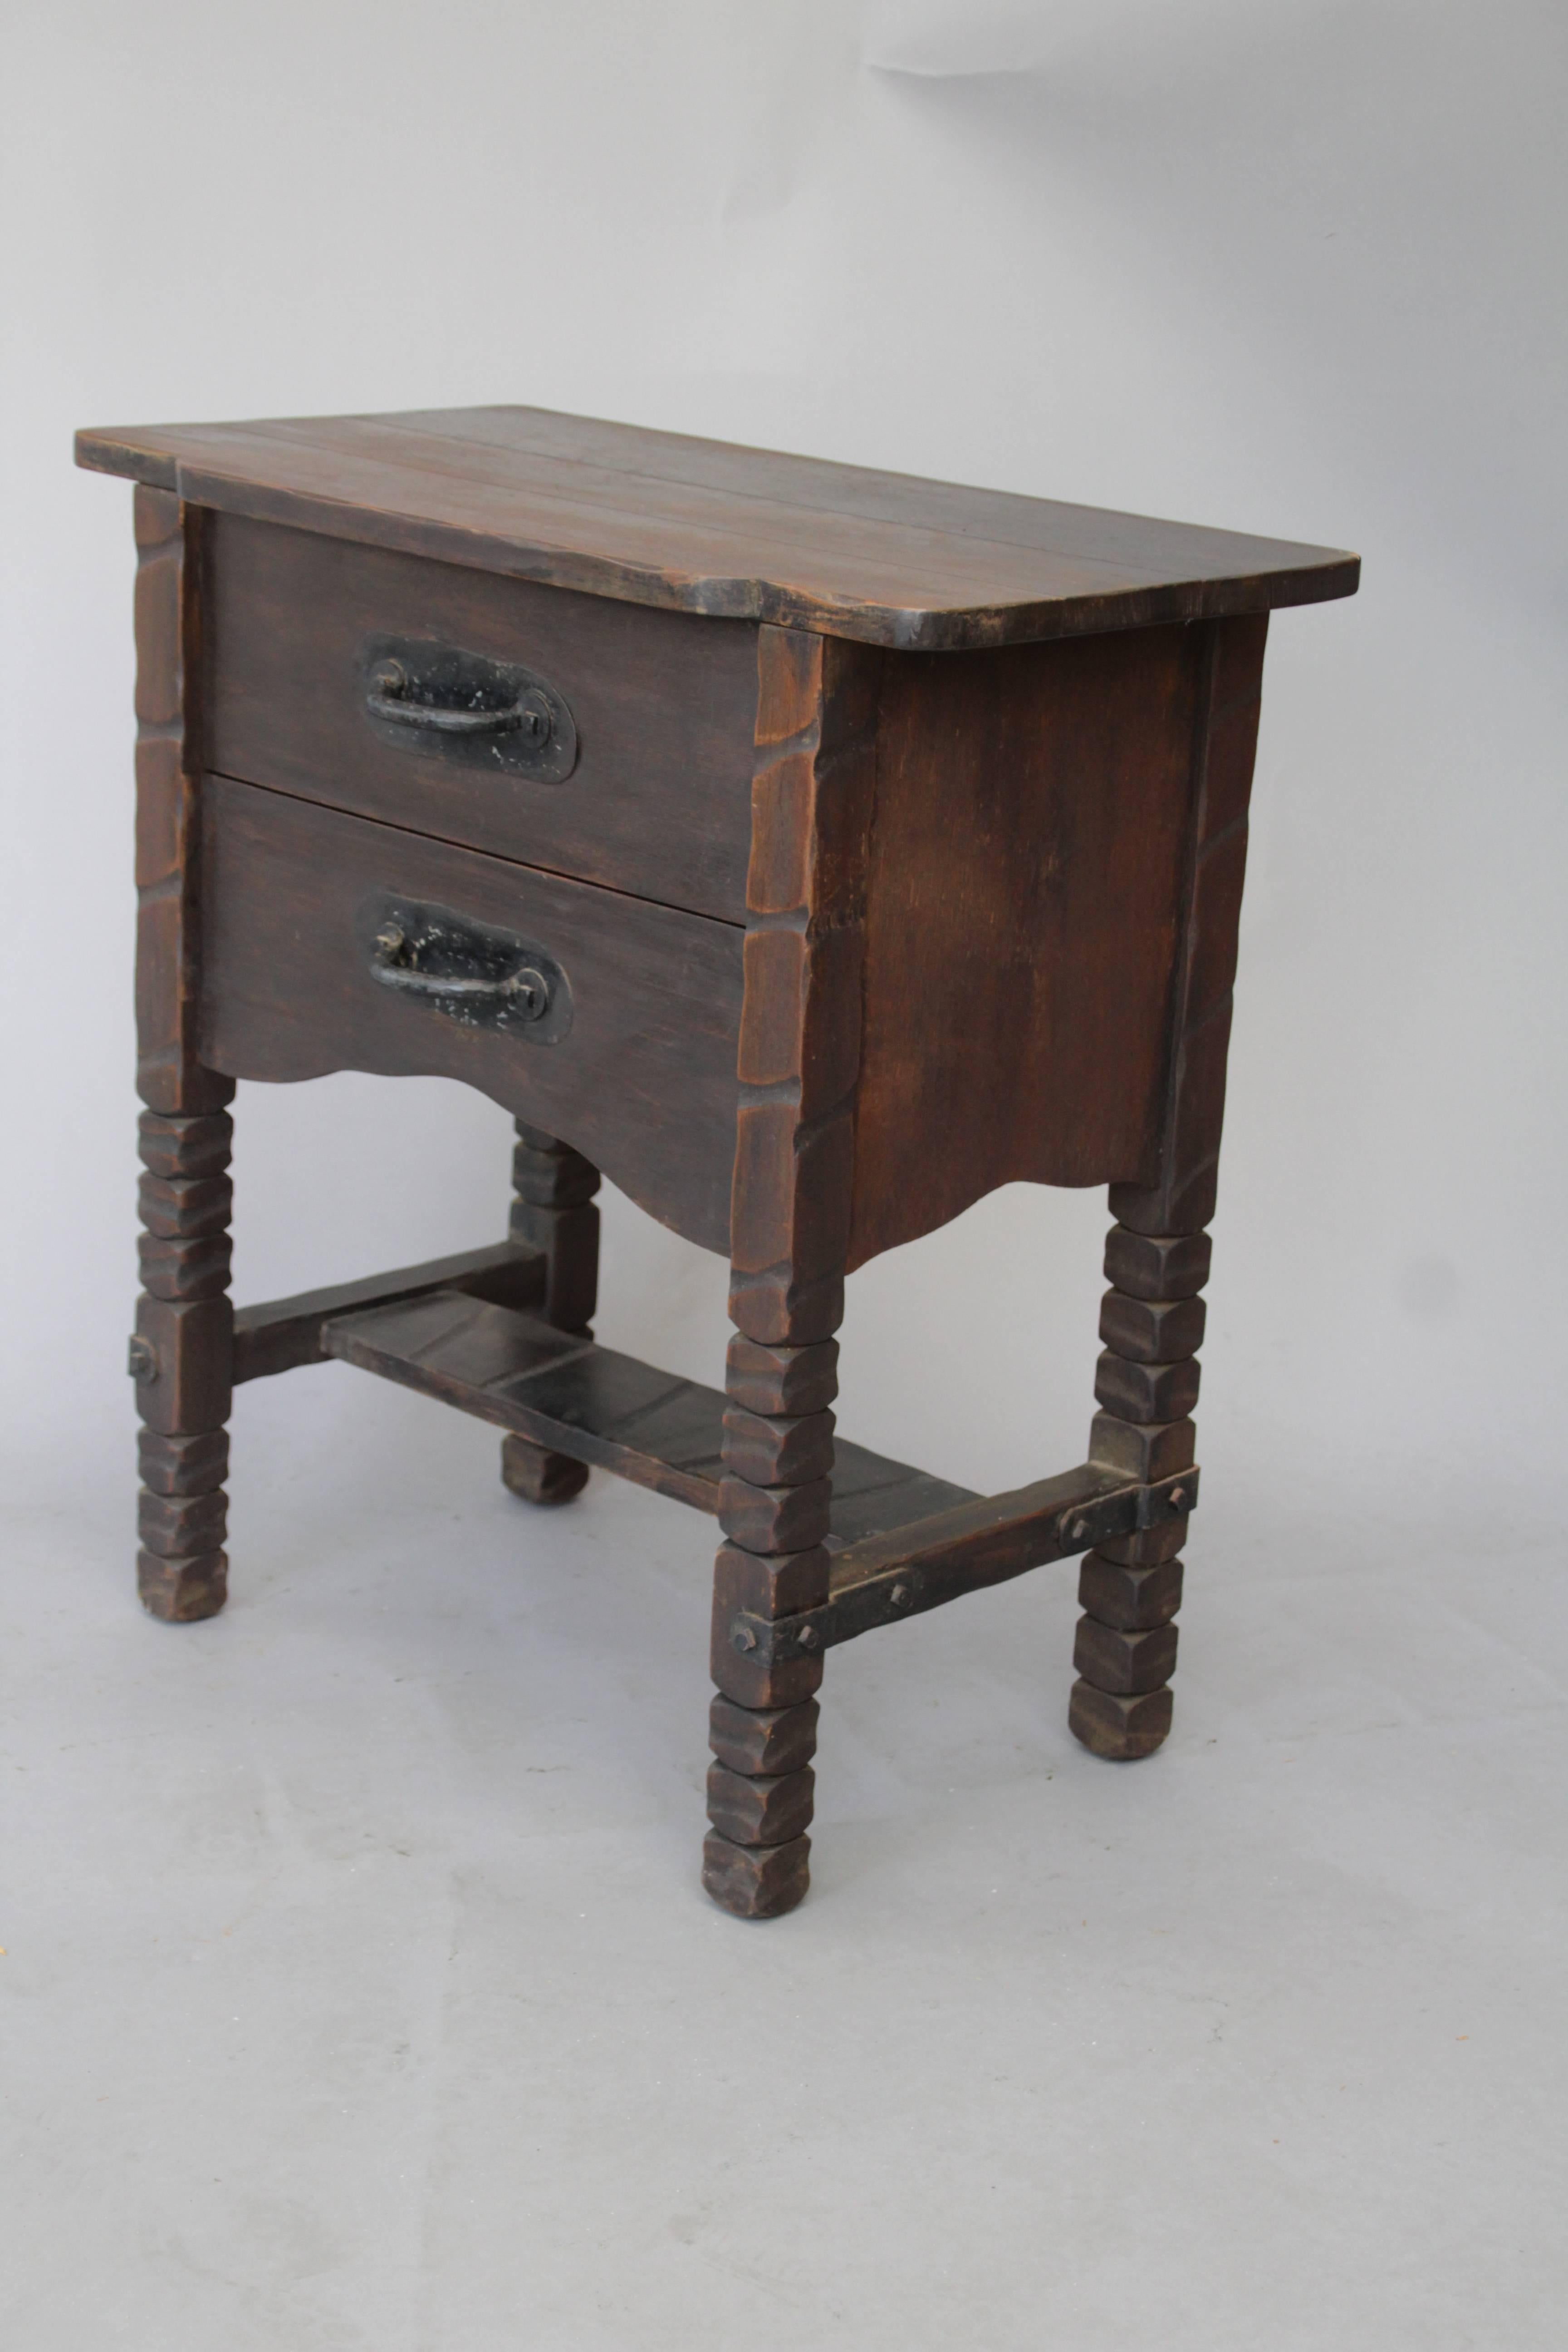 Rancho Monterey 1930s Rare Monterey Nightstand in Old Wood Finish